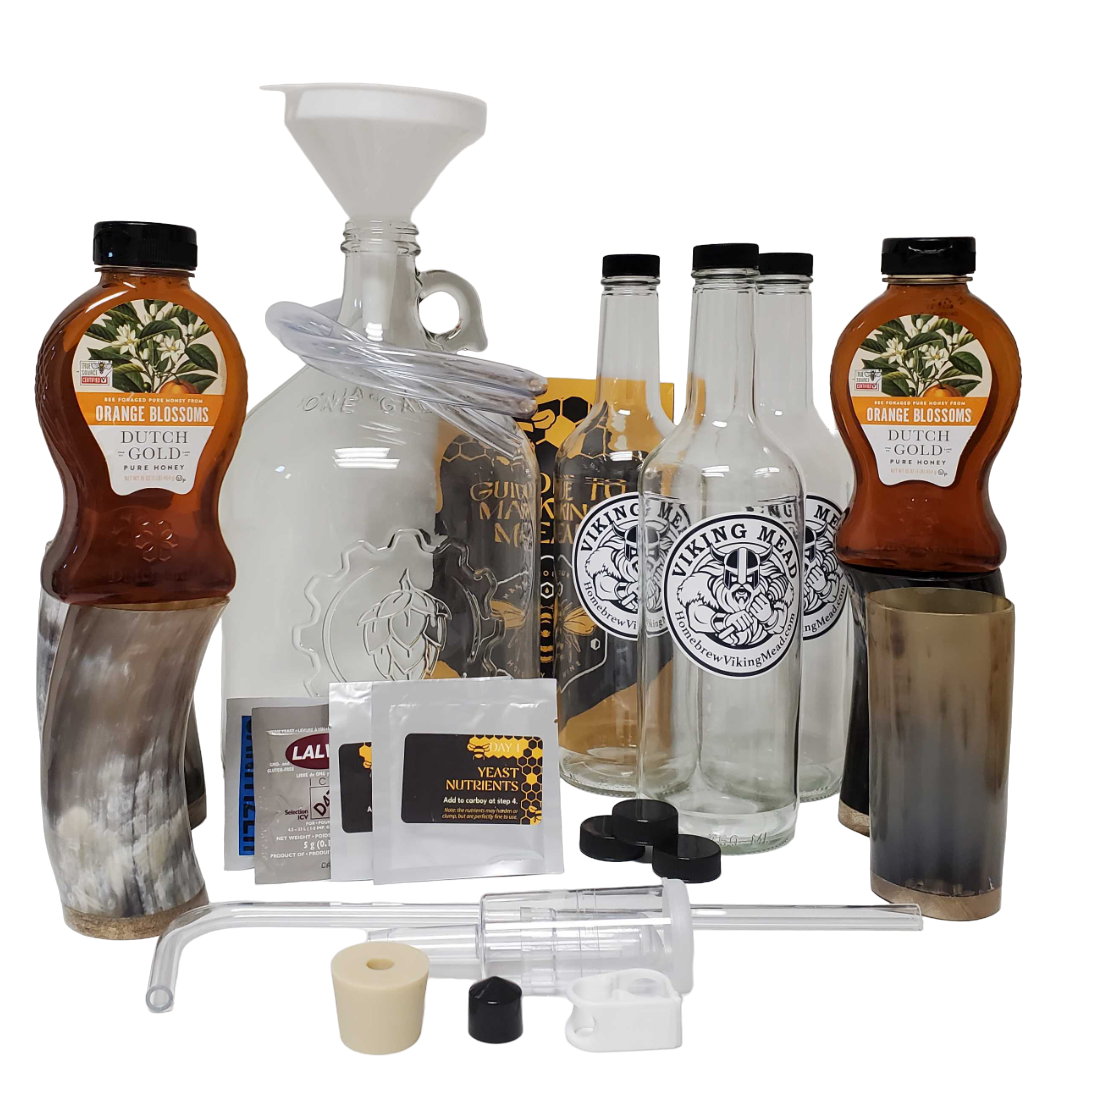 Homebrew Viking Mead Making Kit by Dry Age Chef